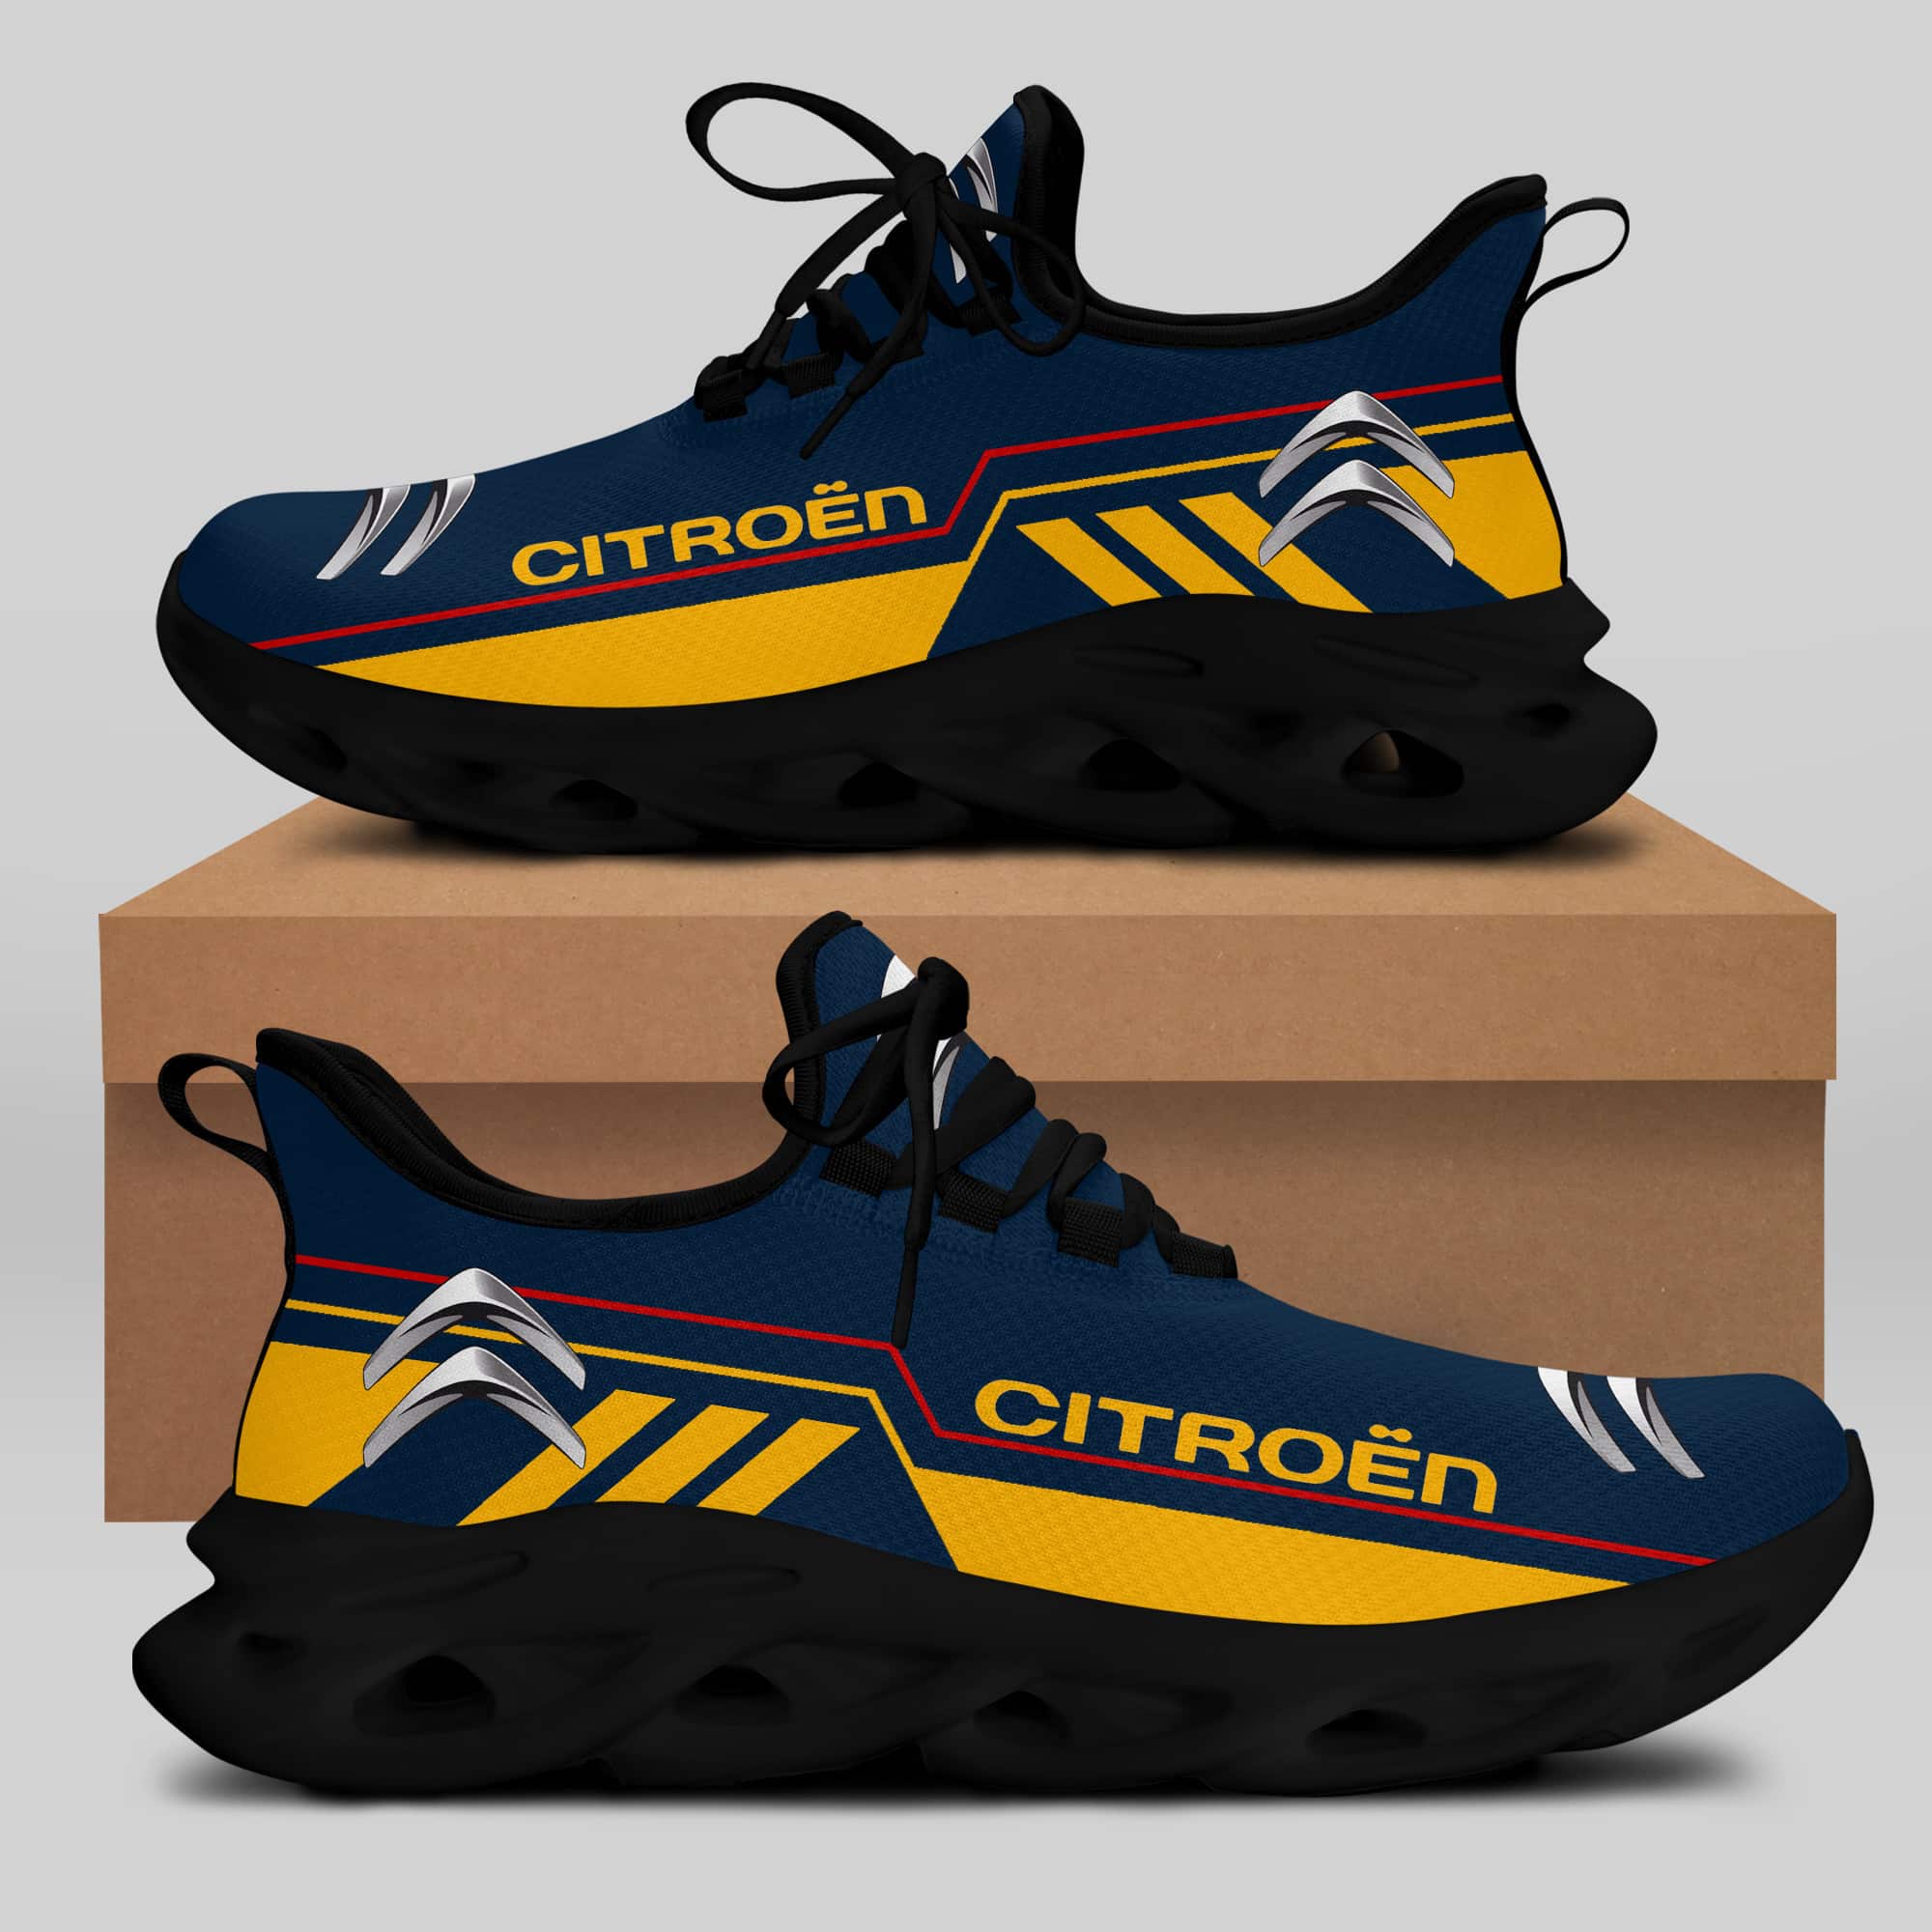 Citroën Running Shoes Max Soul Shoes Sneakers Ver 11 1